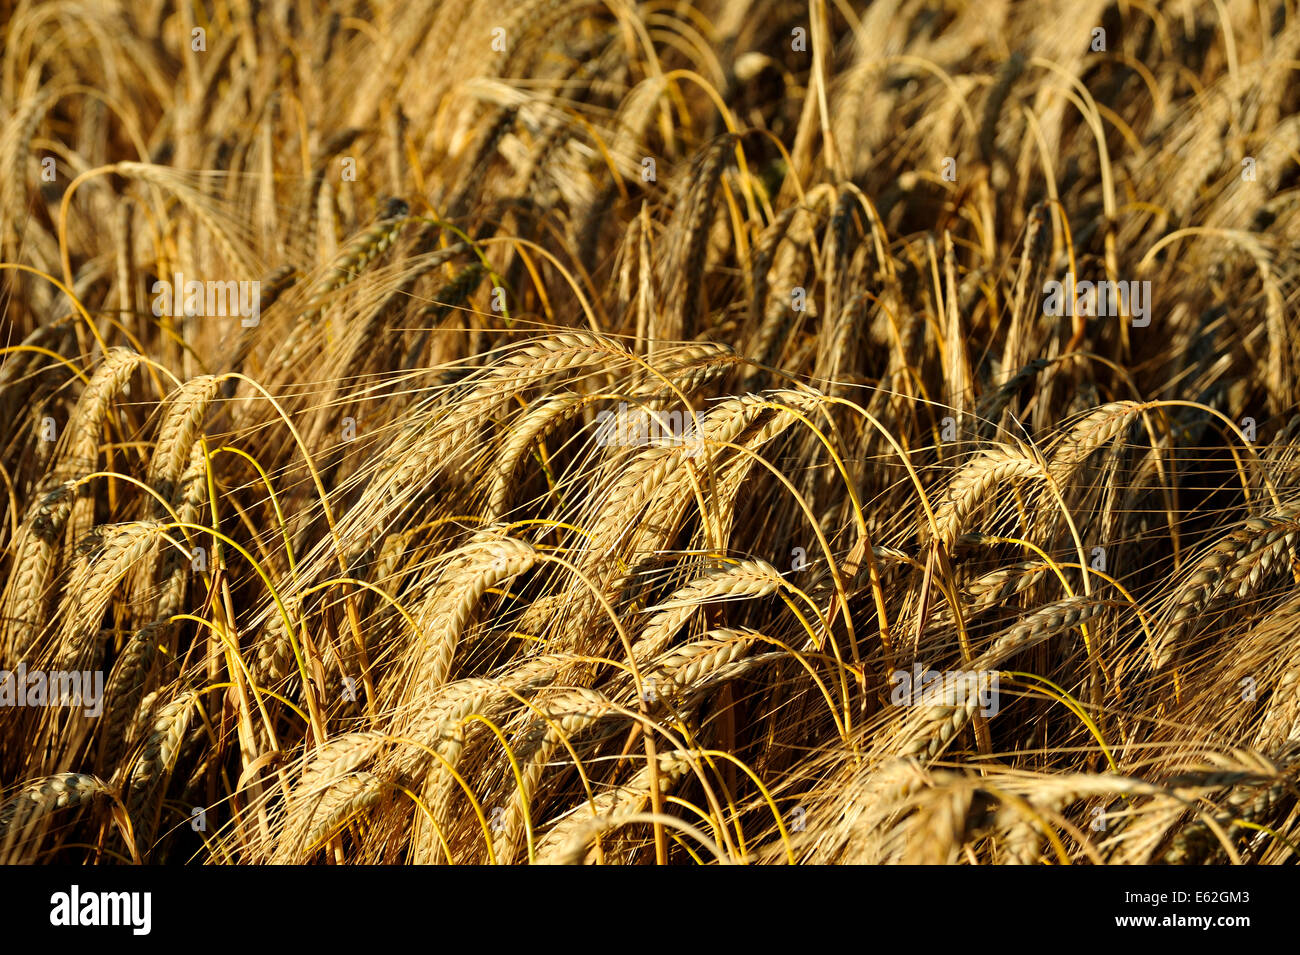 CLOSE UP OF A FIELD OF GROWING BARLEY Stock Photo